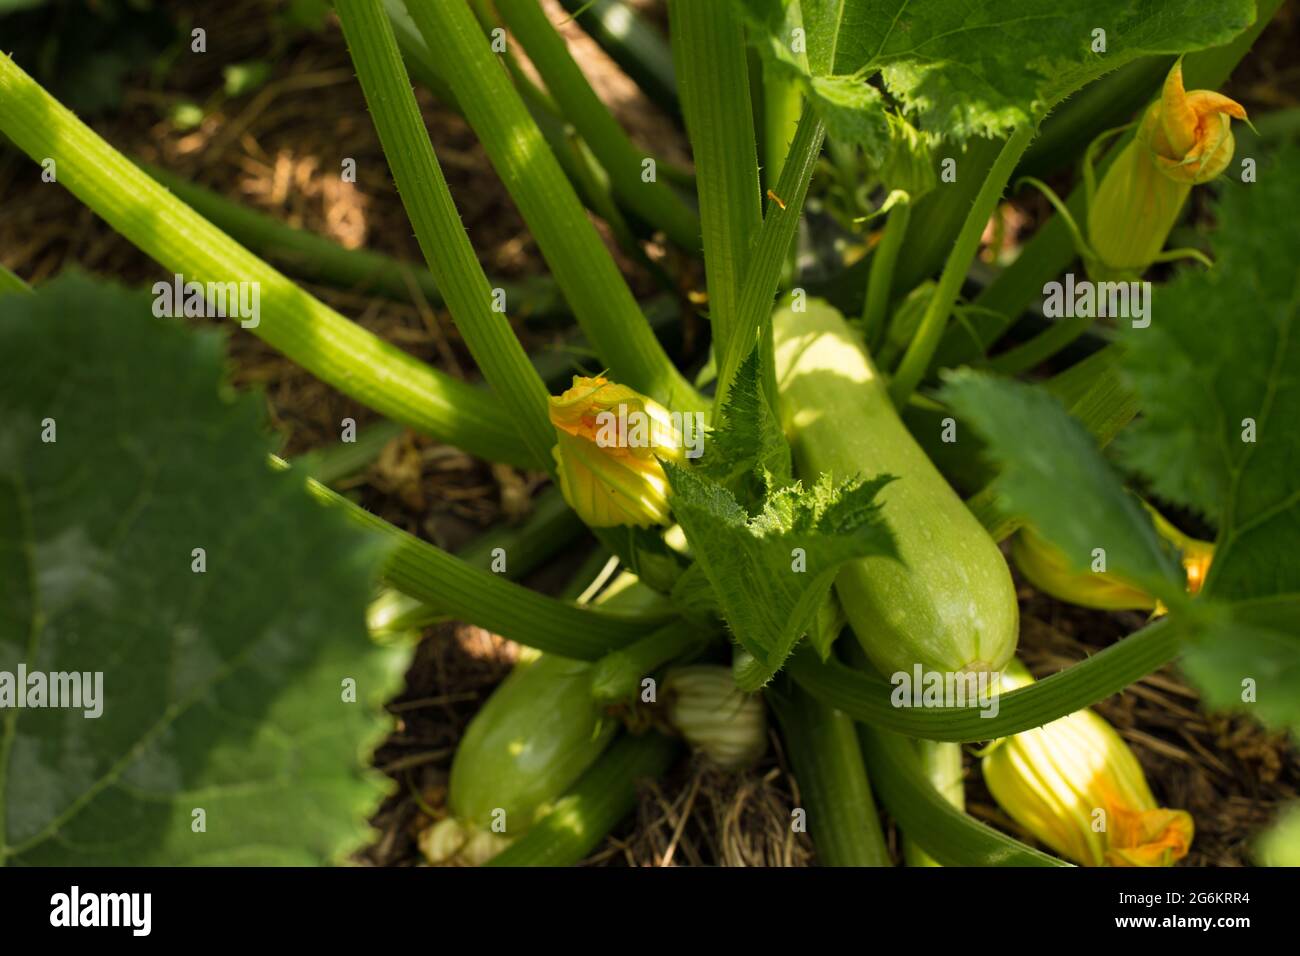 Young white vegetable marrow growing on a plant, close up. Stock Photo